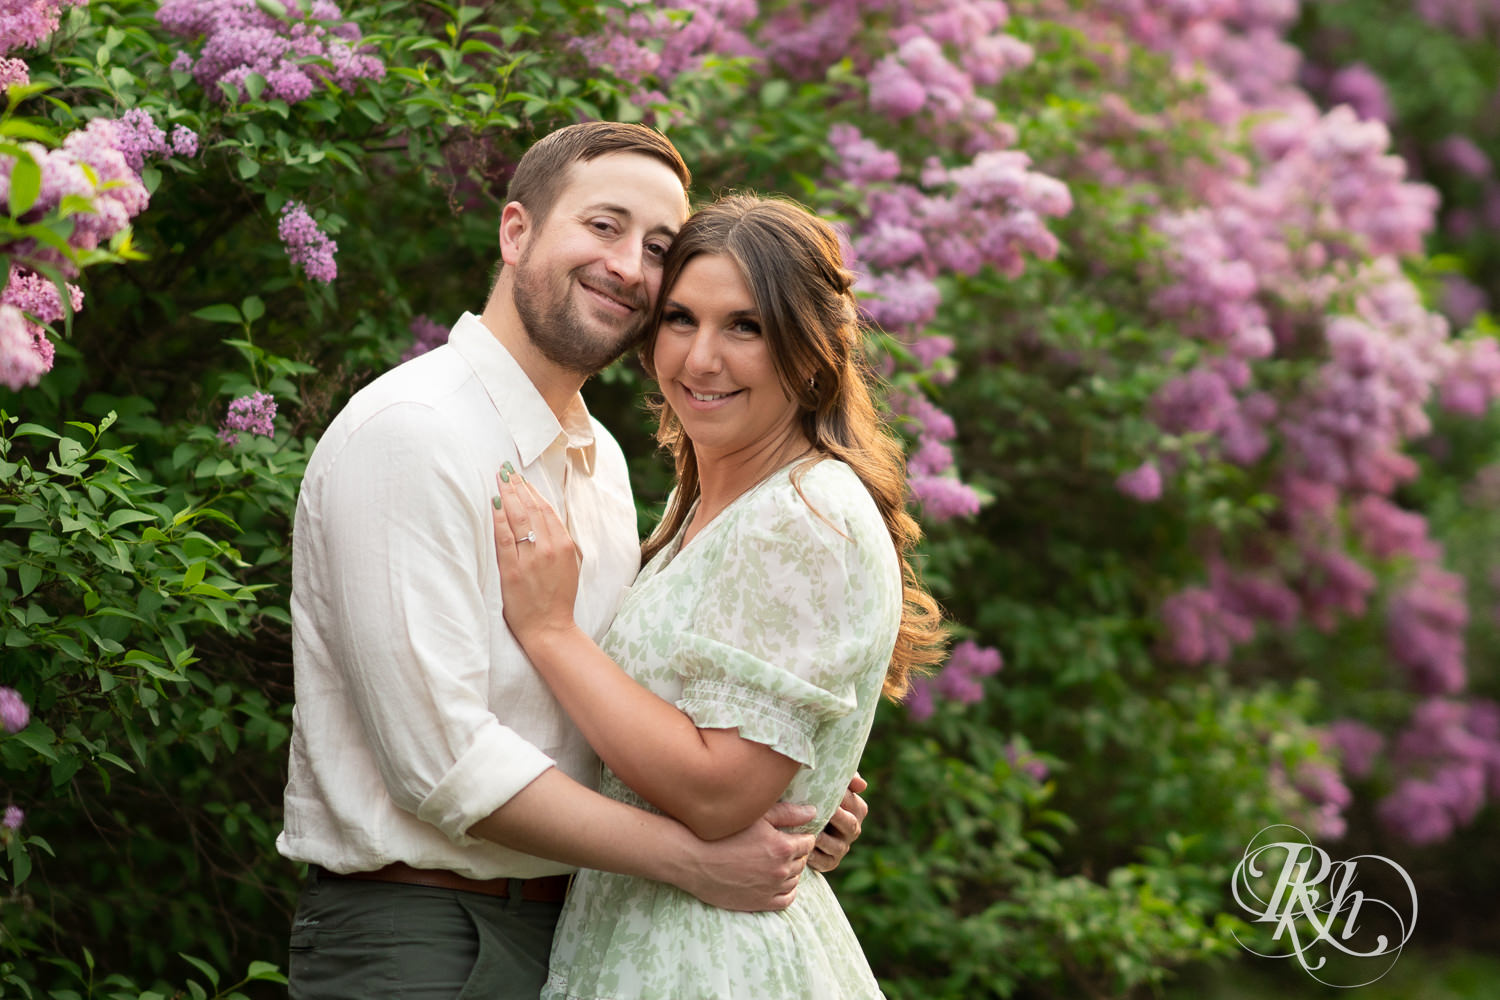 Man in white shirt and woman in green smile in front of lilacs during engagement photography at the Minnesota Landscape Arboretum in Chaska, Minnesota.